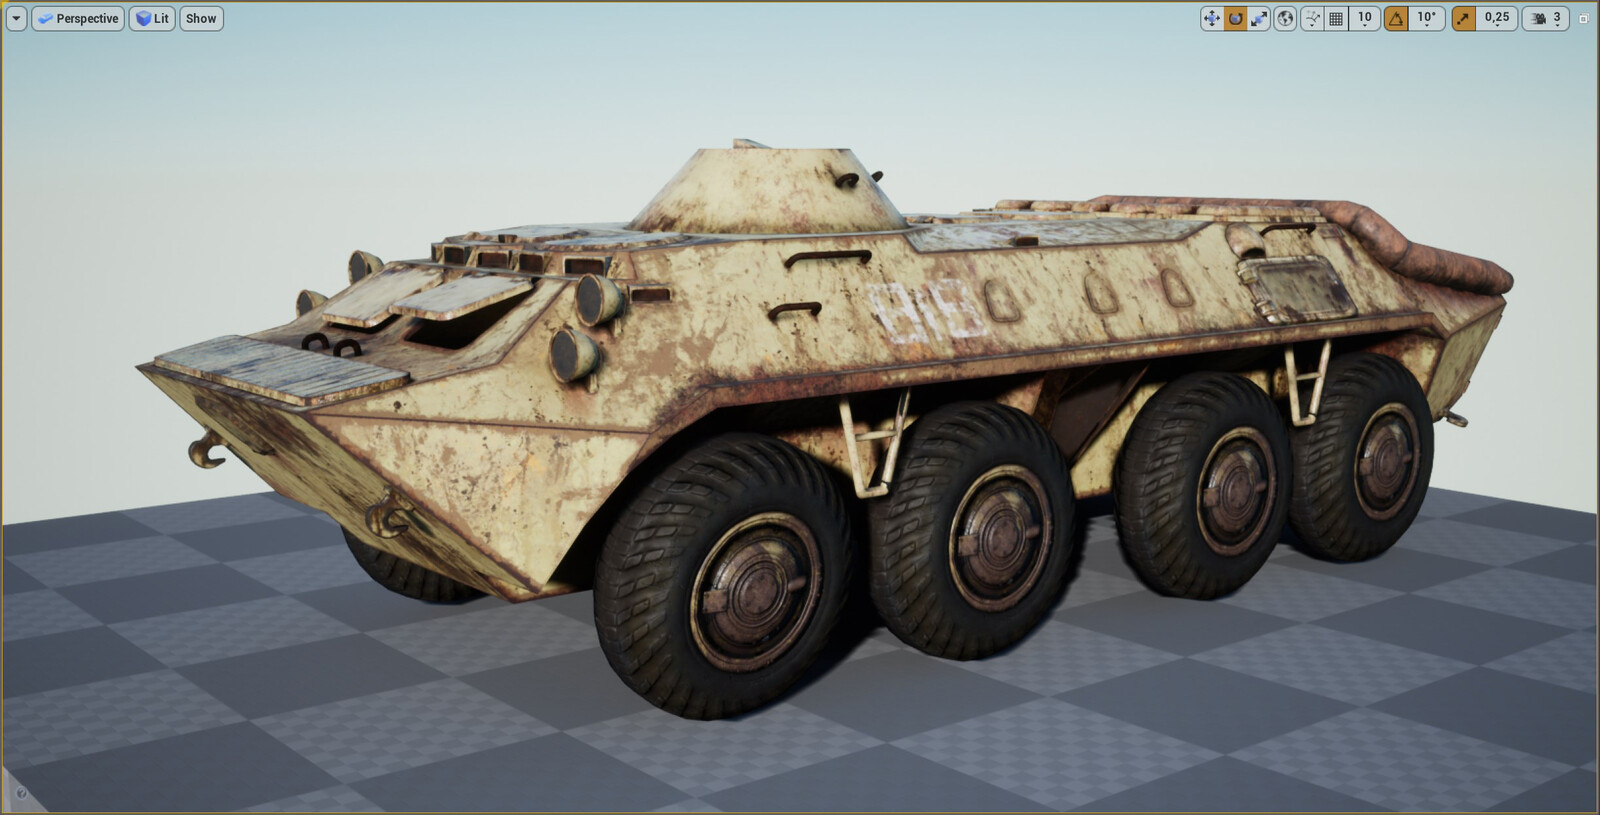 BTR-70 Perspective View in Unreal Engine 4.